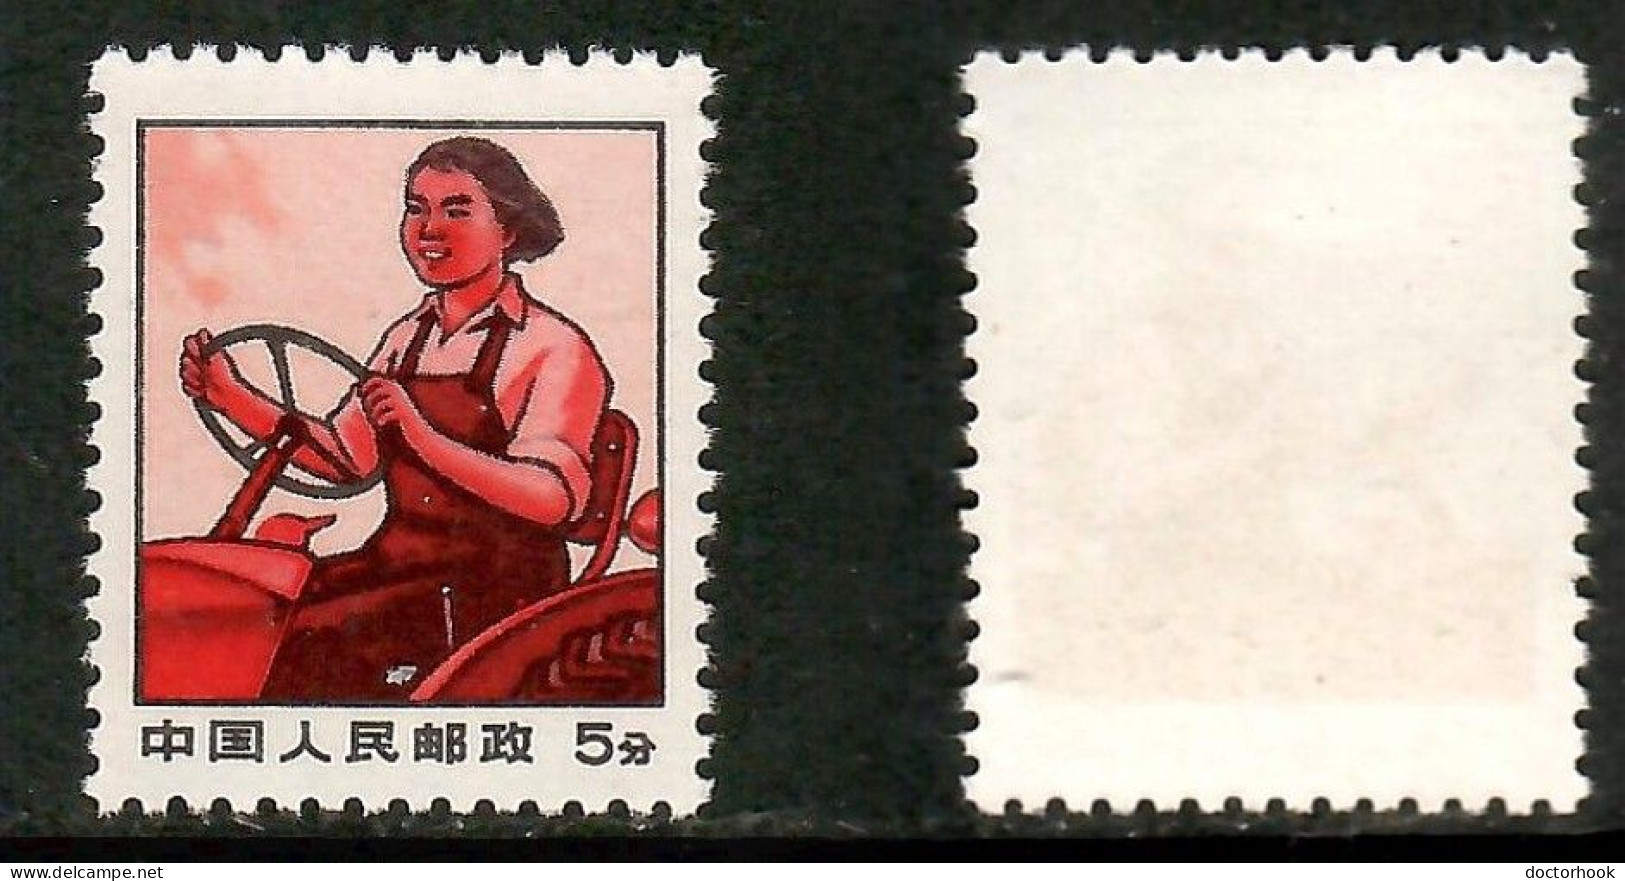 PEOPLES REPUBLIC Of CHINA   Scott # 1024* MINT NO GUM AS ISSUED (CONDITION AS PER SCAN) (Stamp Scan # 1012-4) - Nuovi